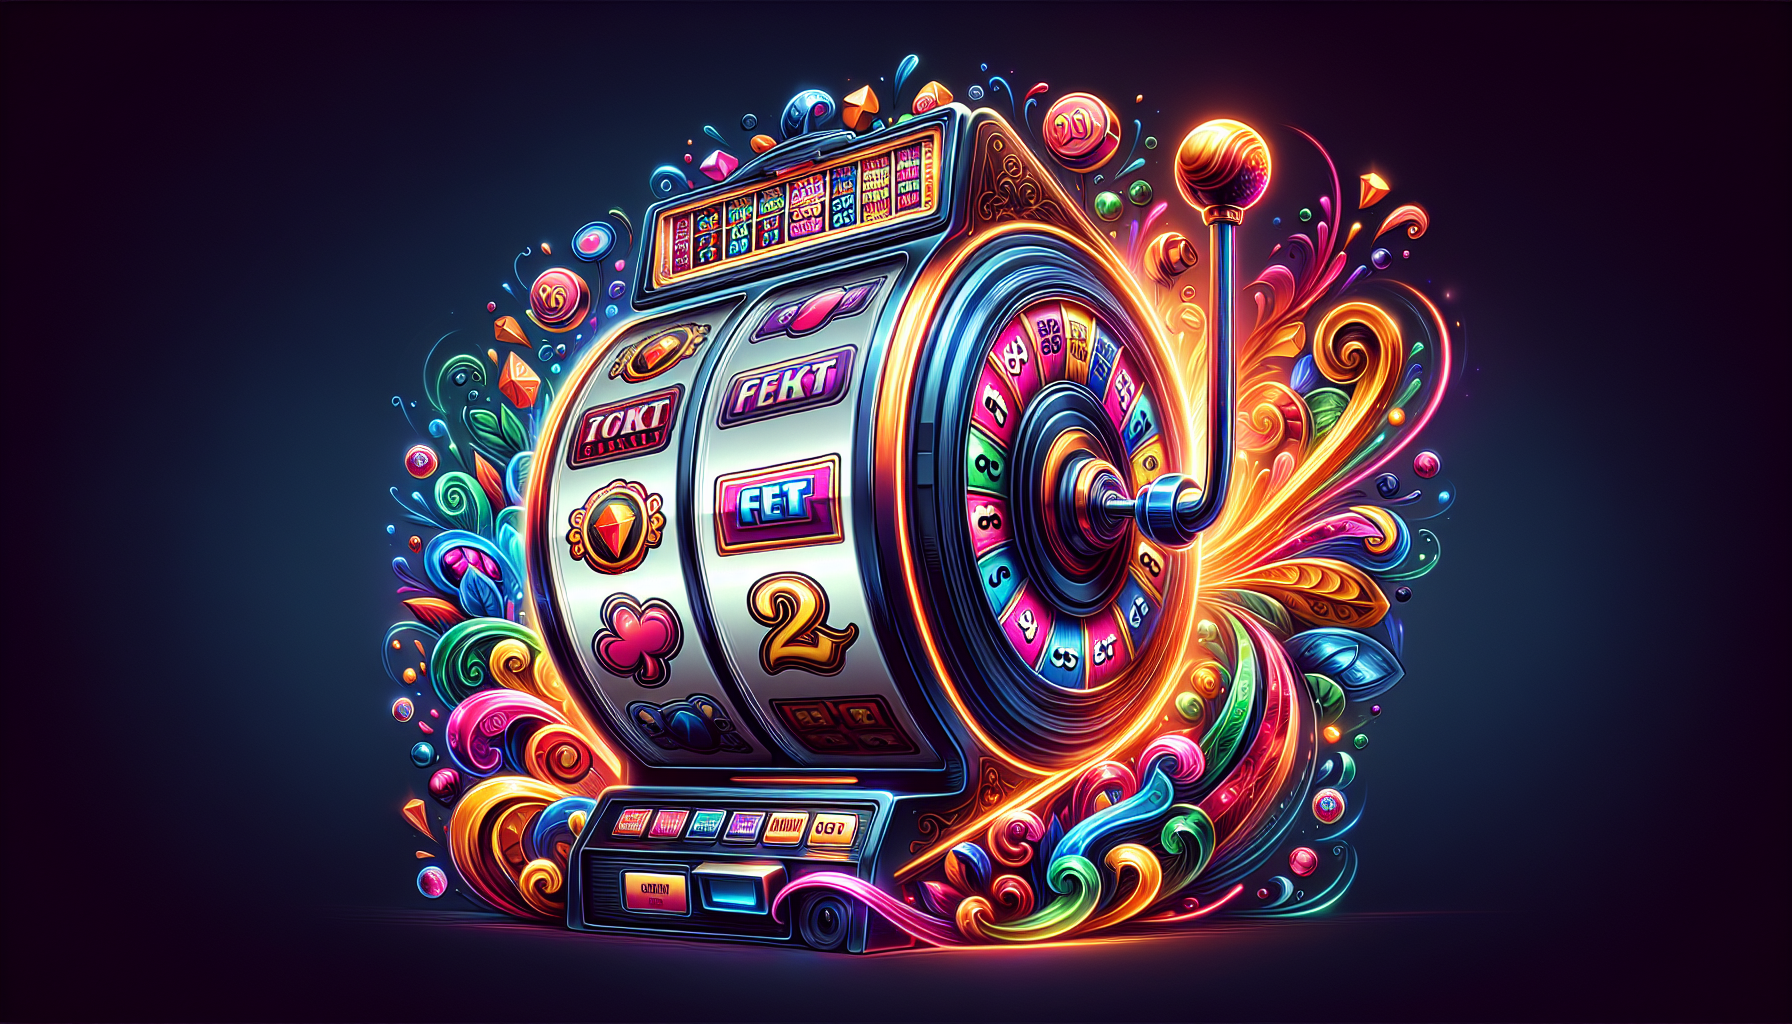 Do Casinos Control Who Wins On Slots?